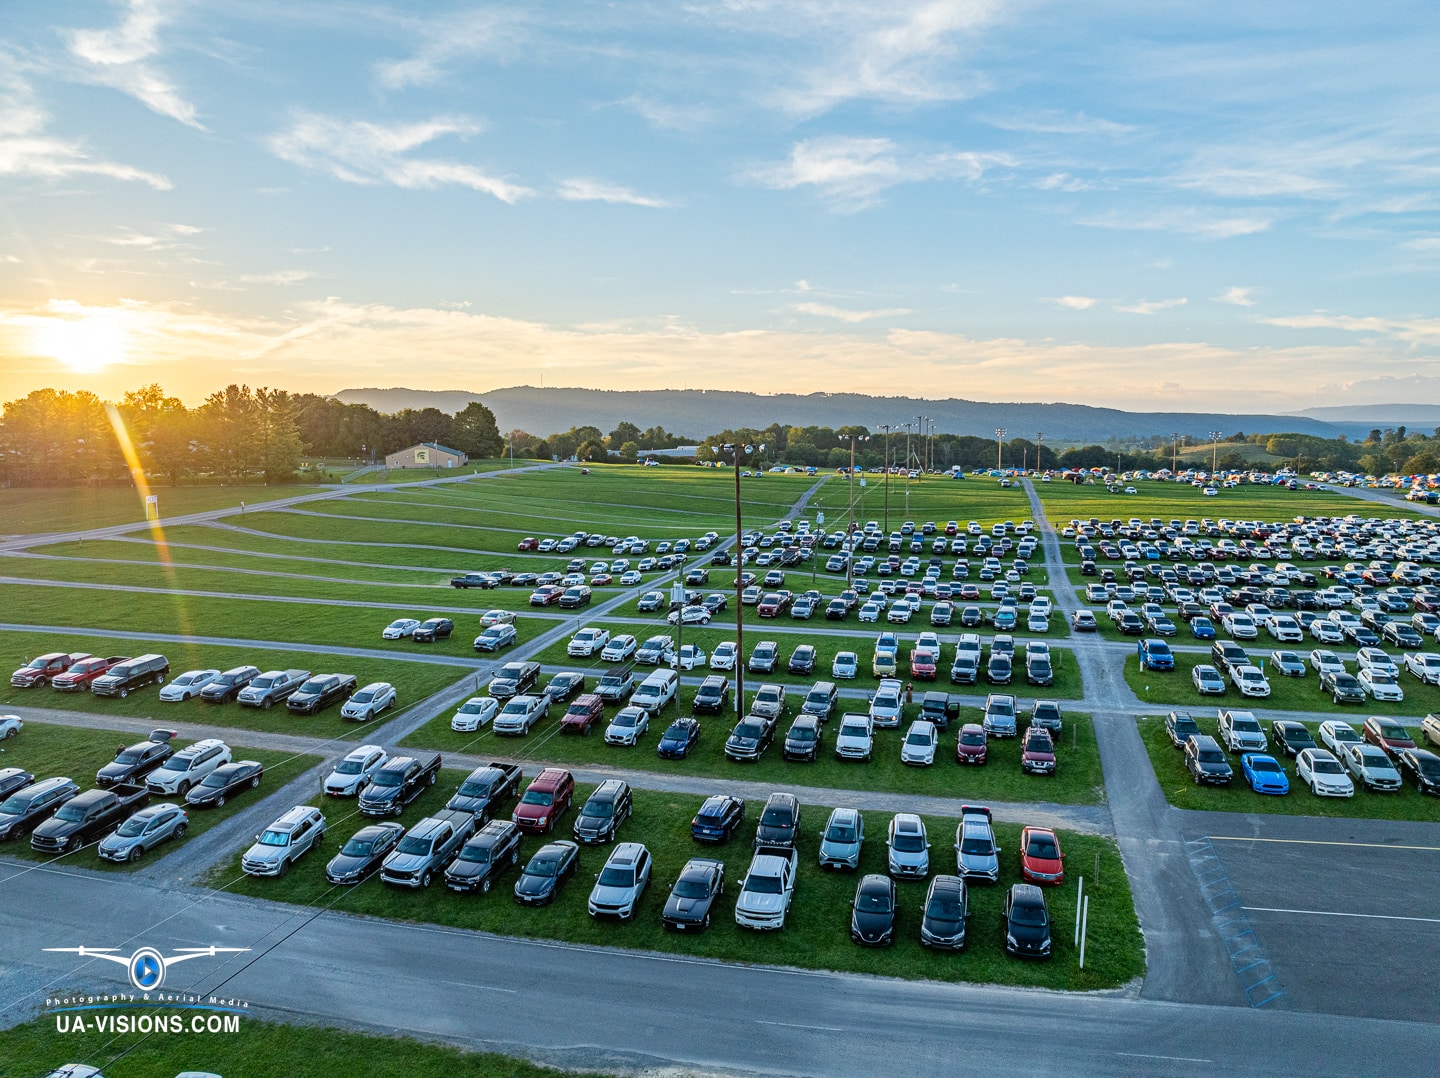 Sunset over a festival parking lot at Healing Appalachia, where cars rest before the night's encore.